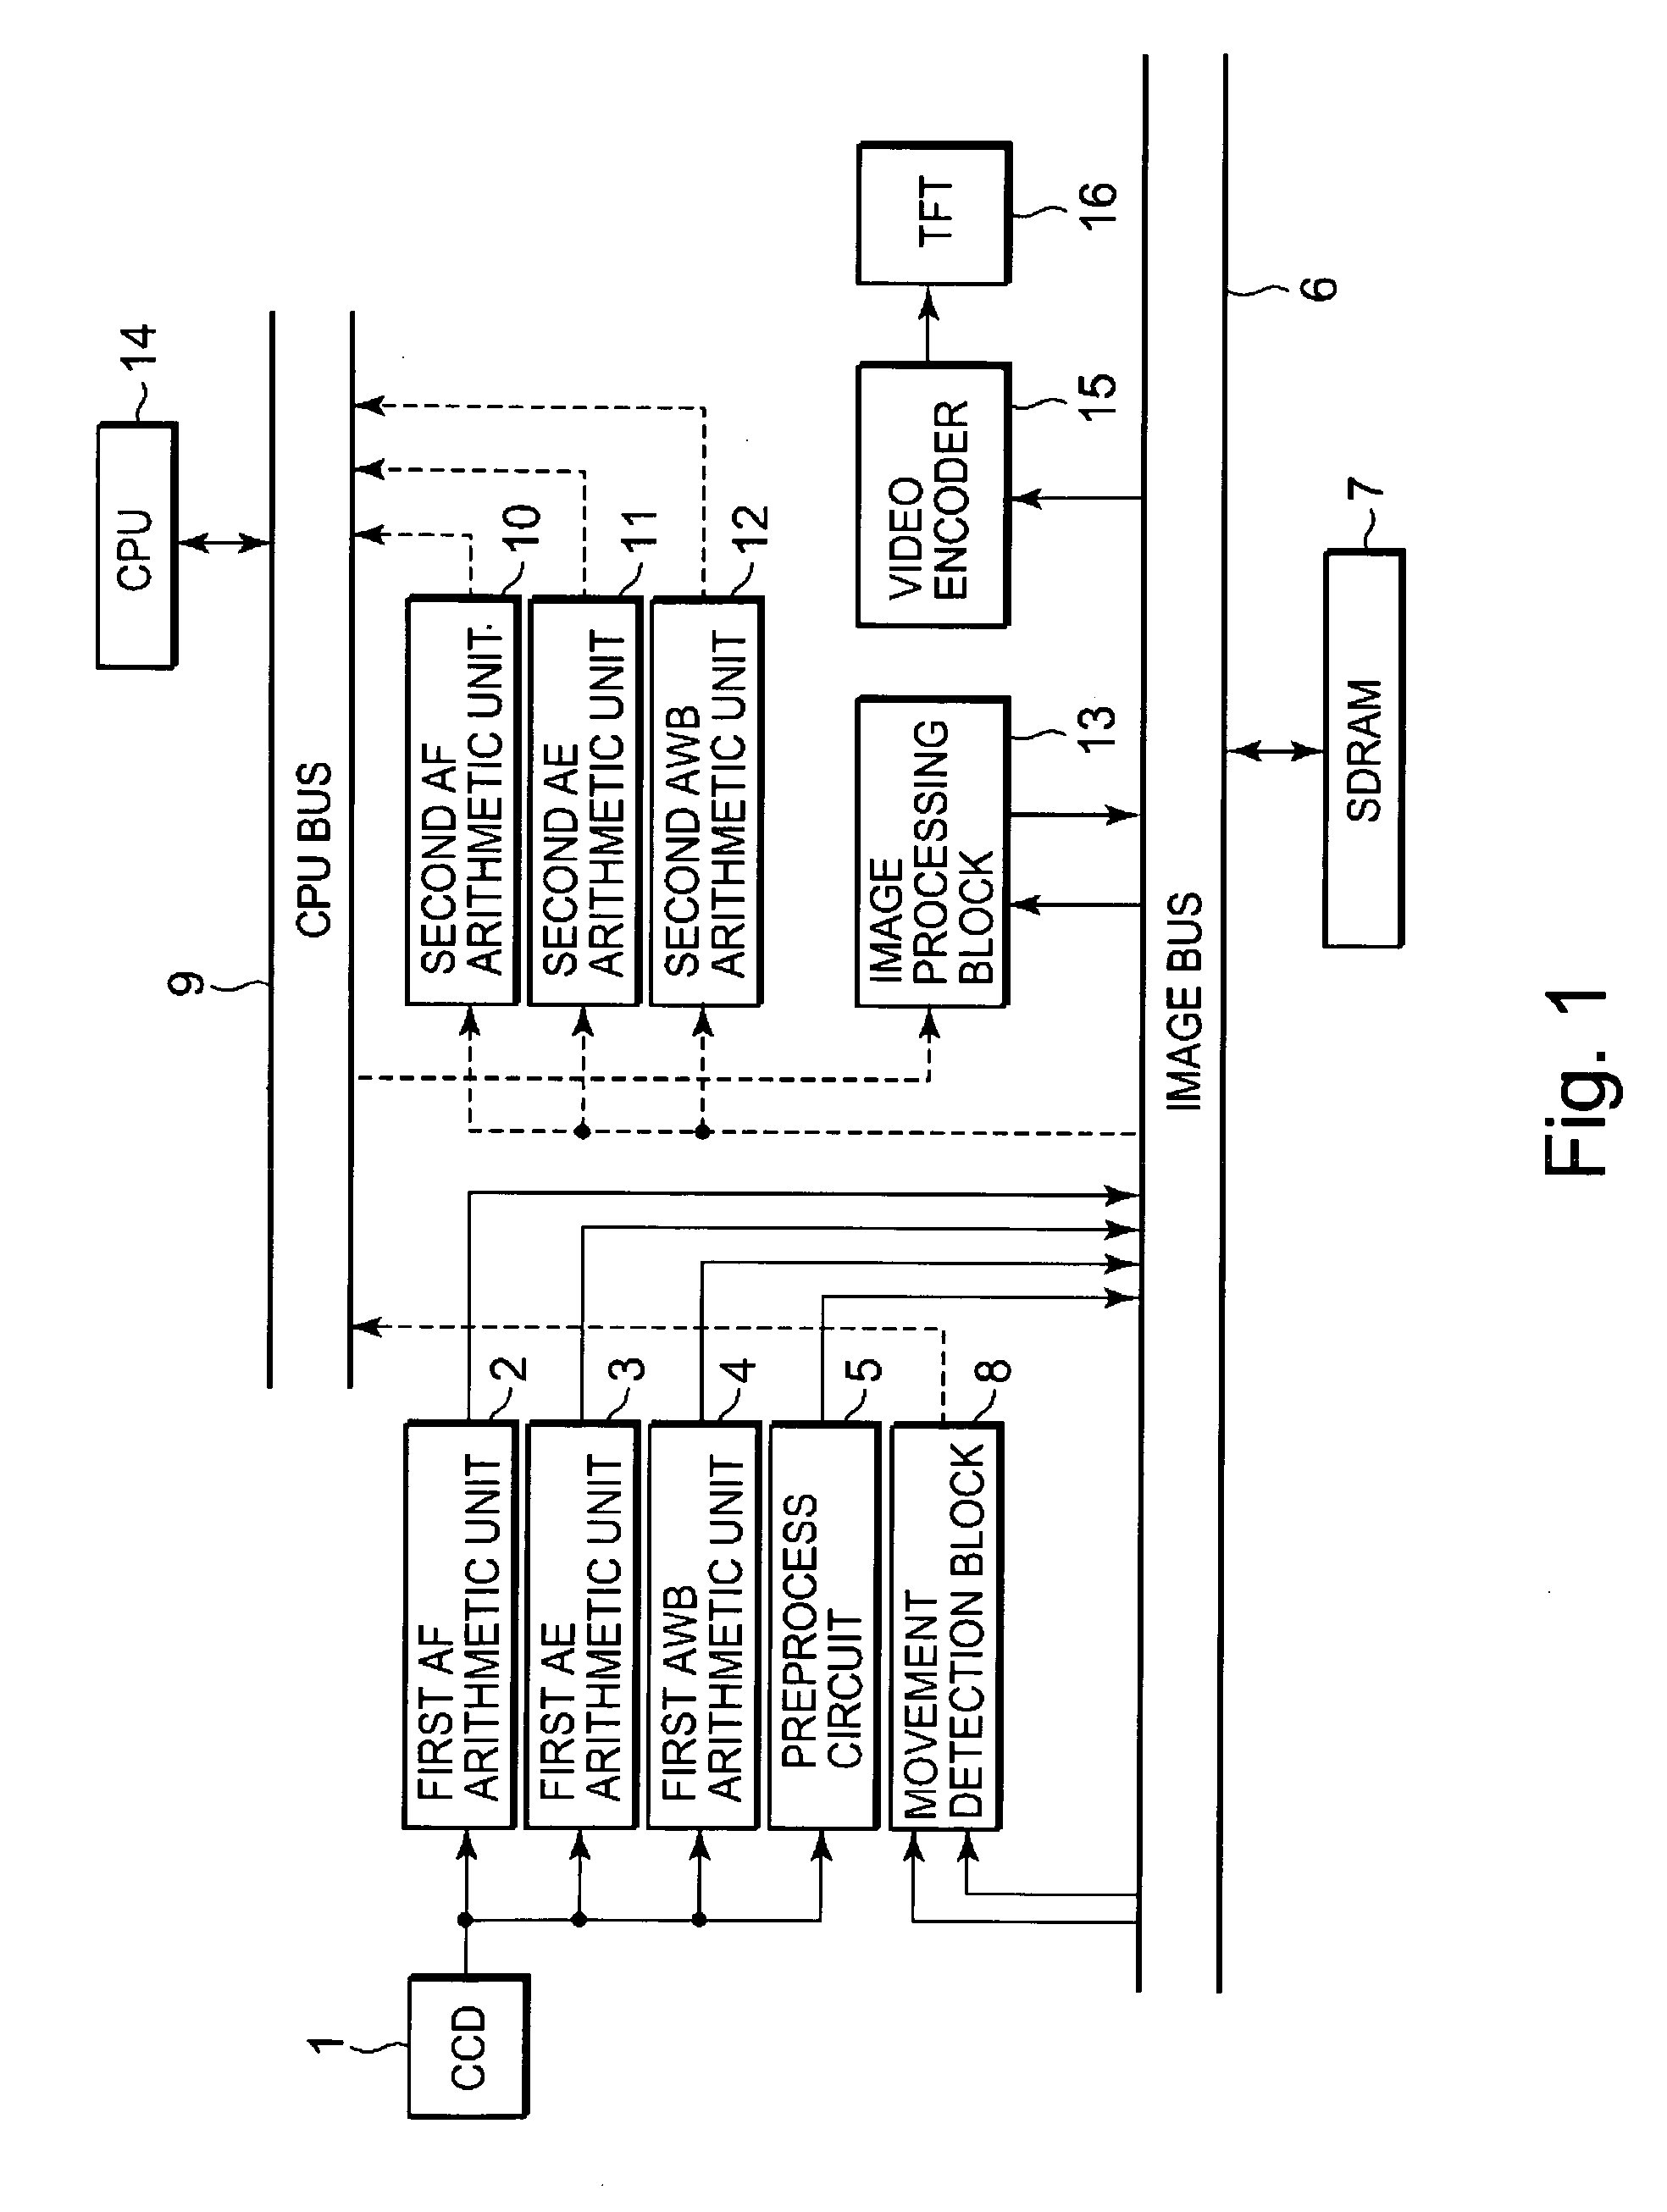 Image processing device and electronic camera